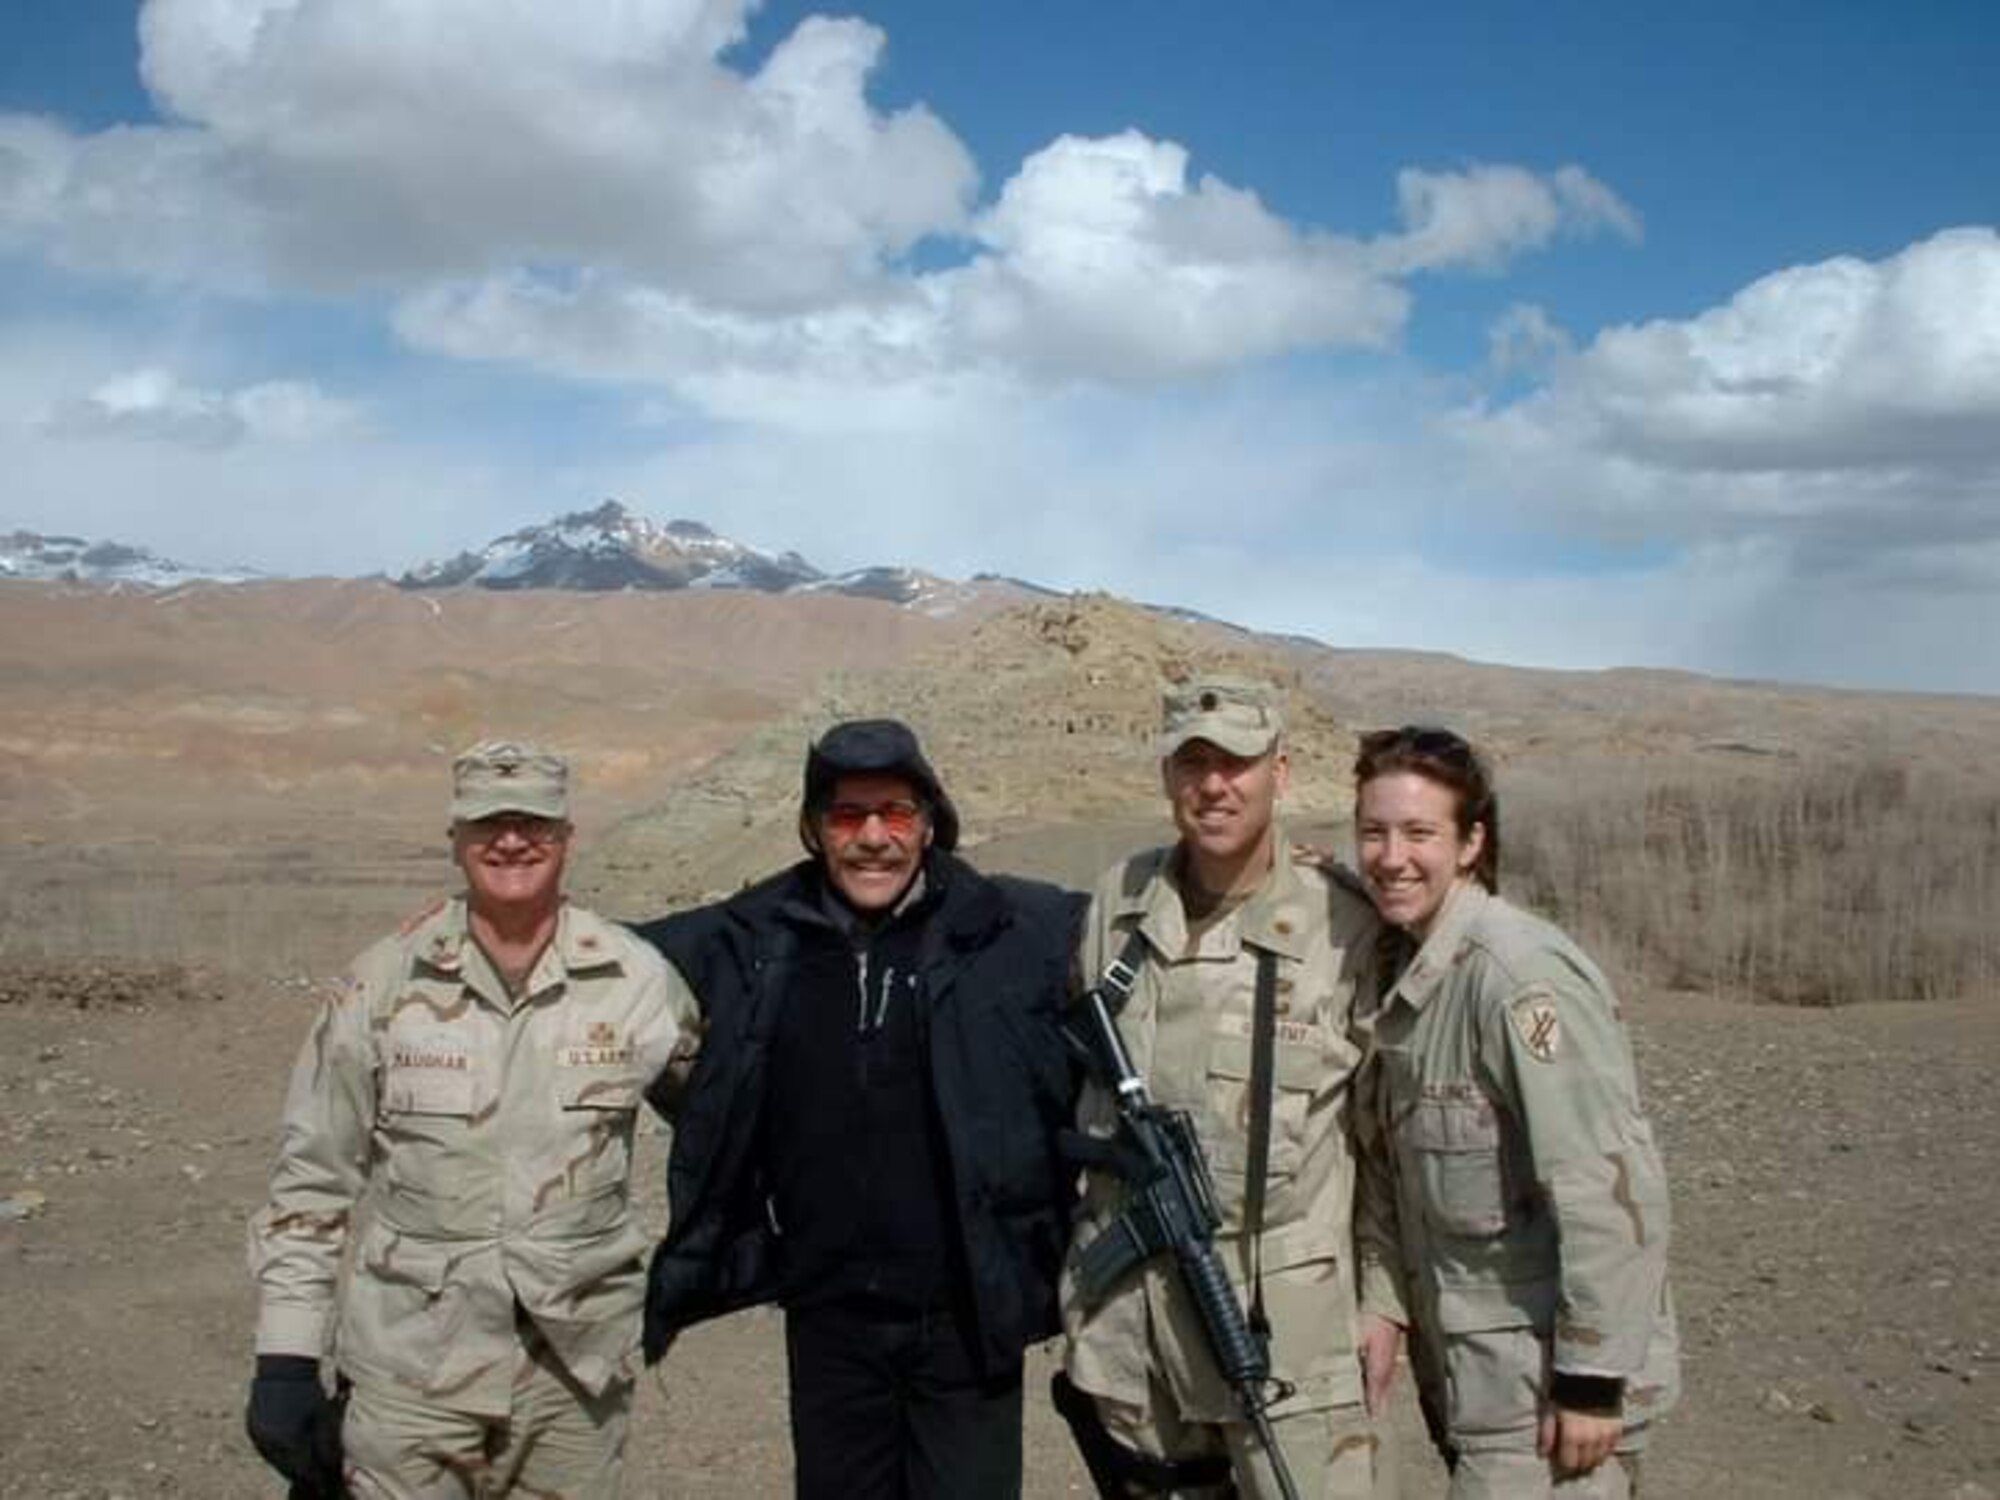 Now-Air Force Lt. Col. Elizabeth Hoettels, 423rd Medical Squadron commander, poses for a photo during a deployment in Afghanistan in front of Ghenghis Khan's castle during her prior career as an Army Civil Affairs officer. Hoettels served 10 years in the Army before transitioning to the Air Force. (Courtesy photo)